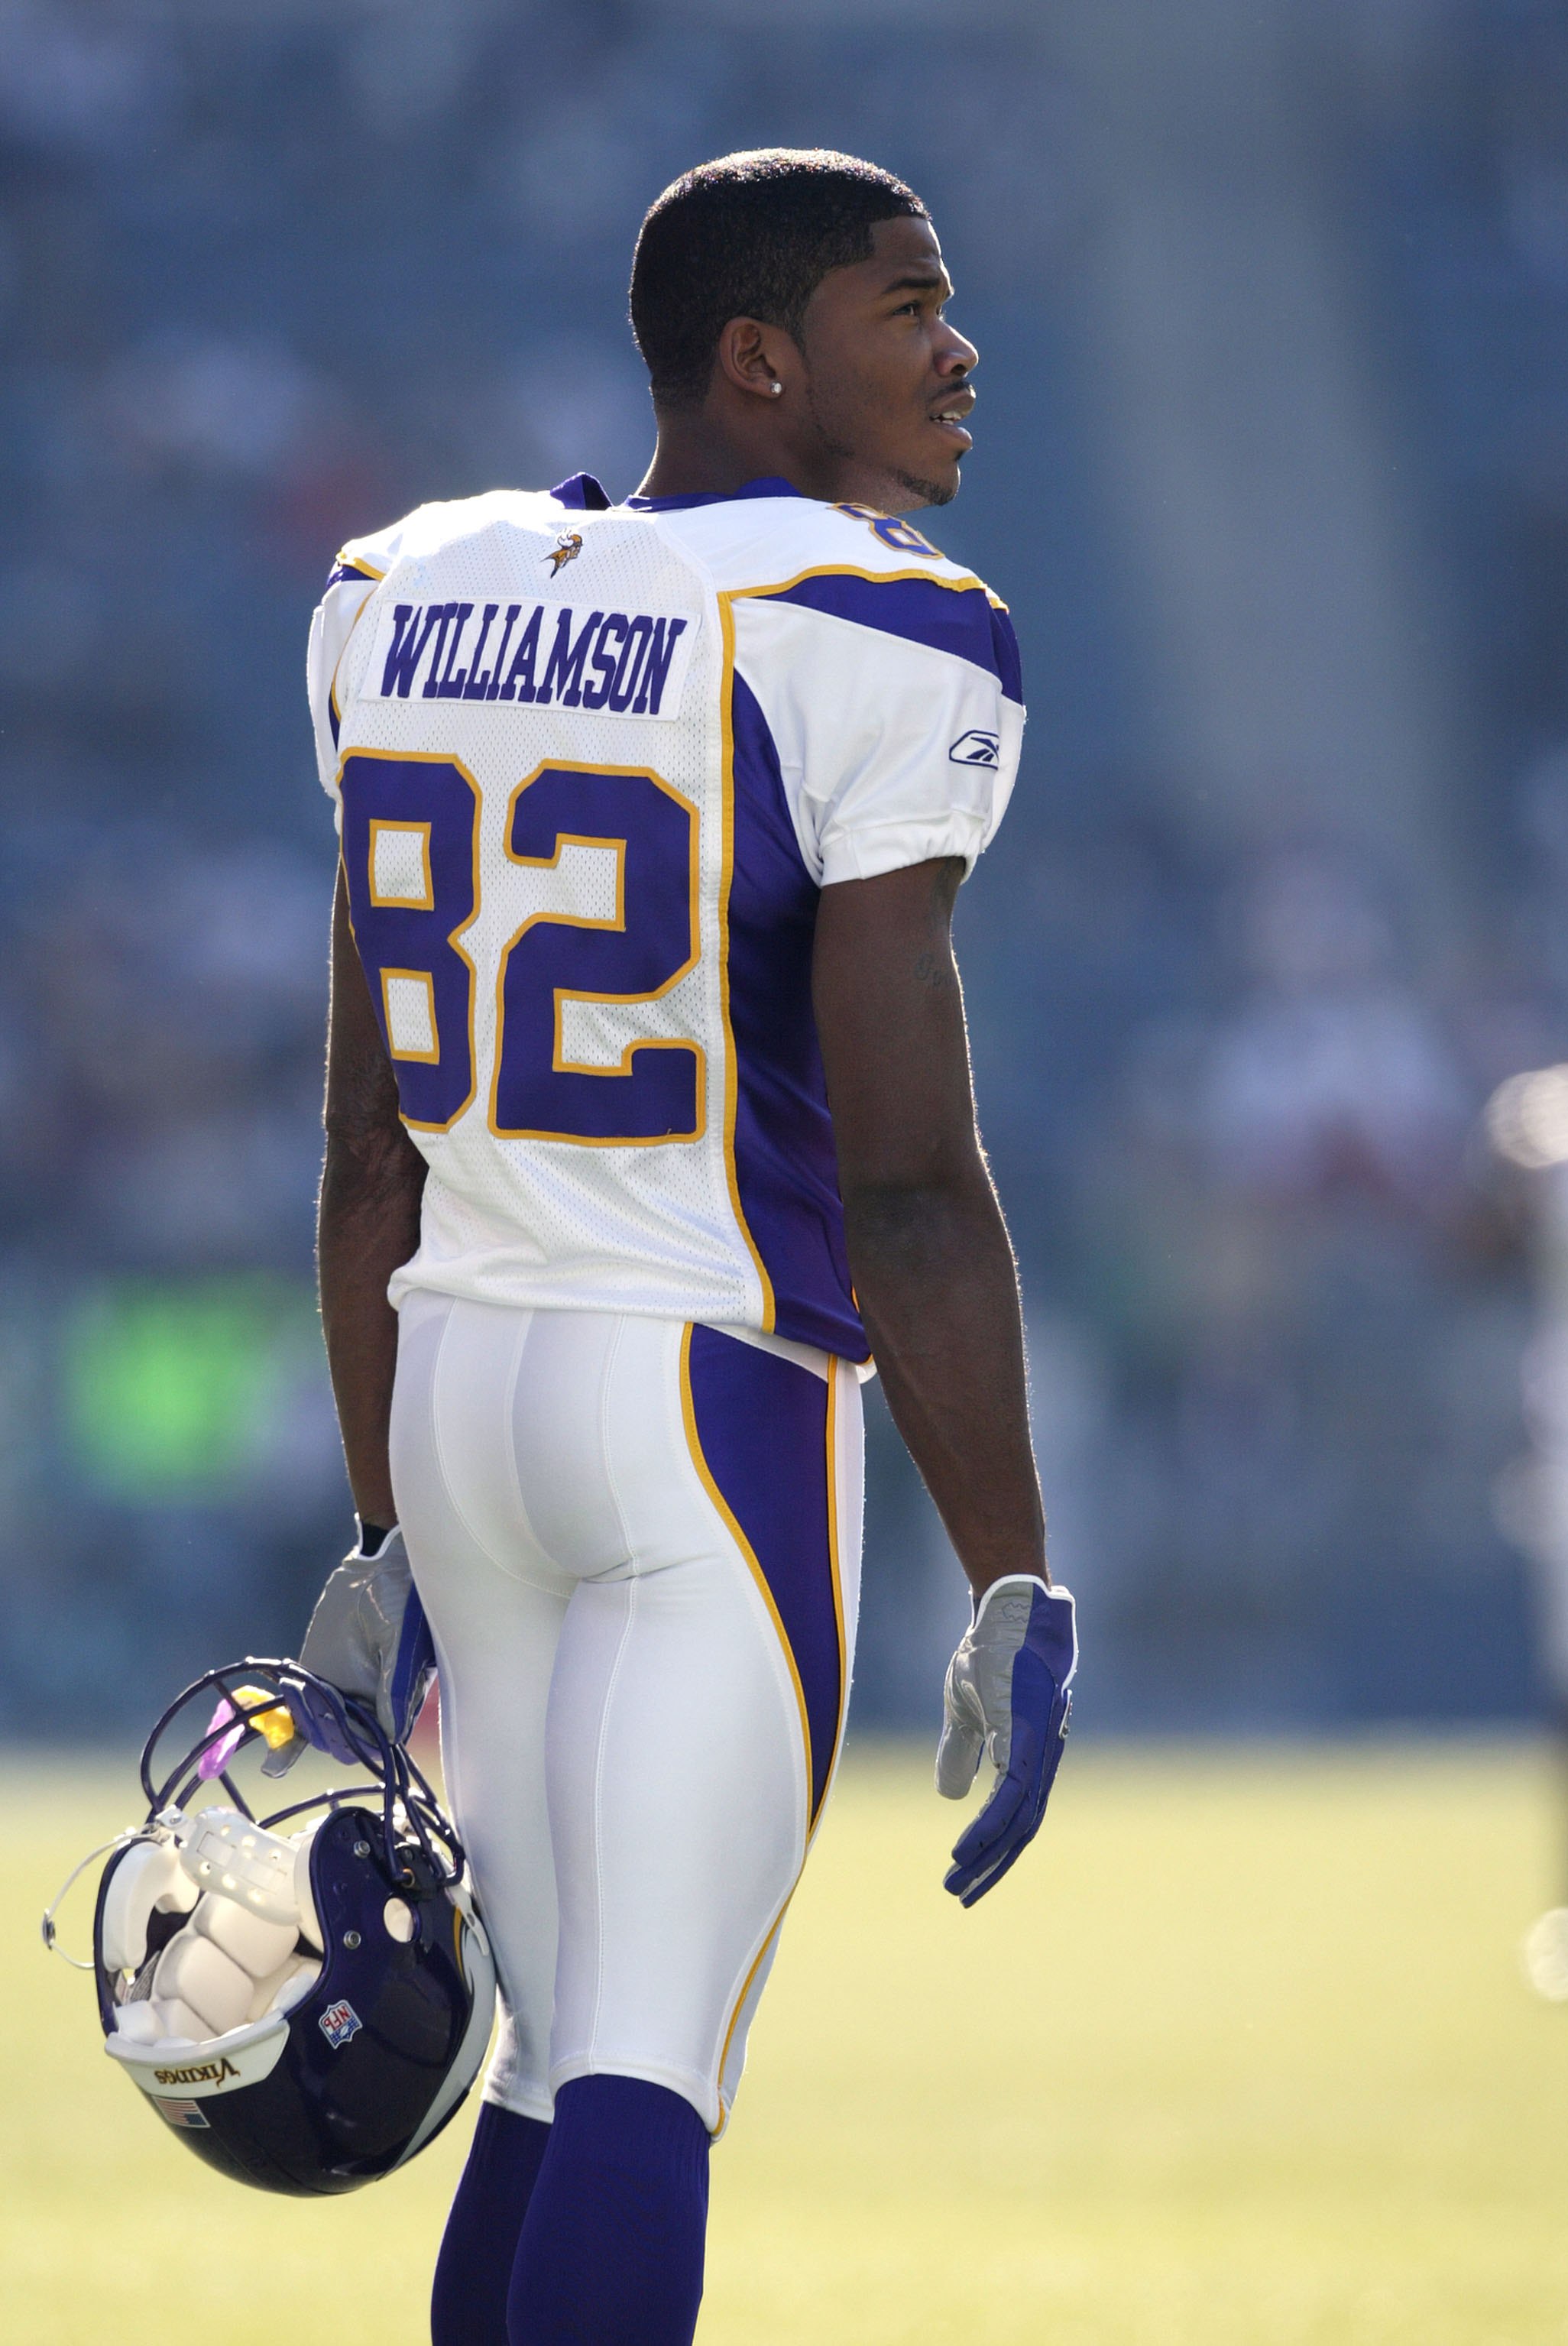 Top 15 Biggest Disappointments and Busts in Vikings History